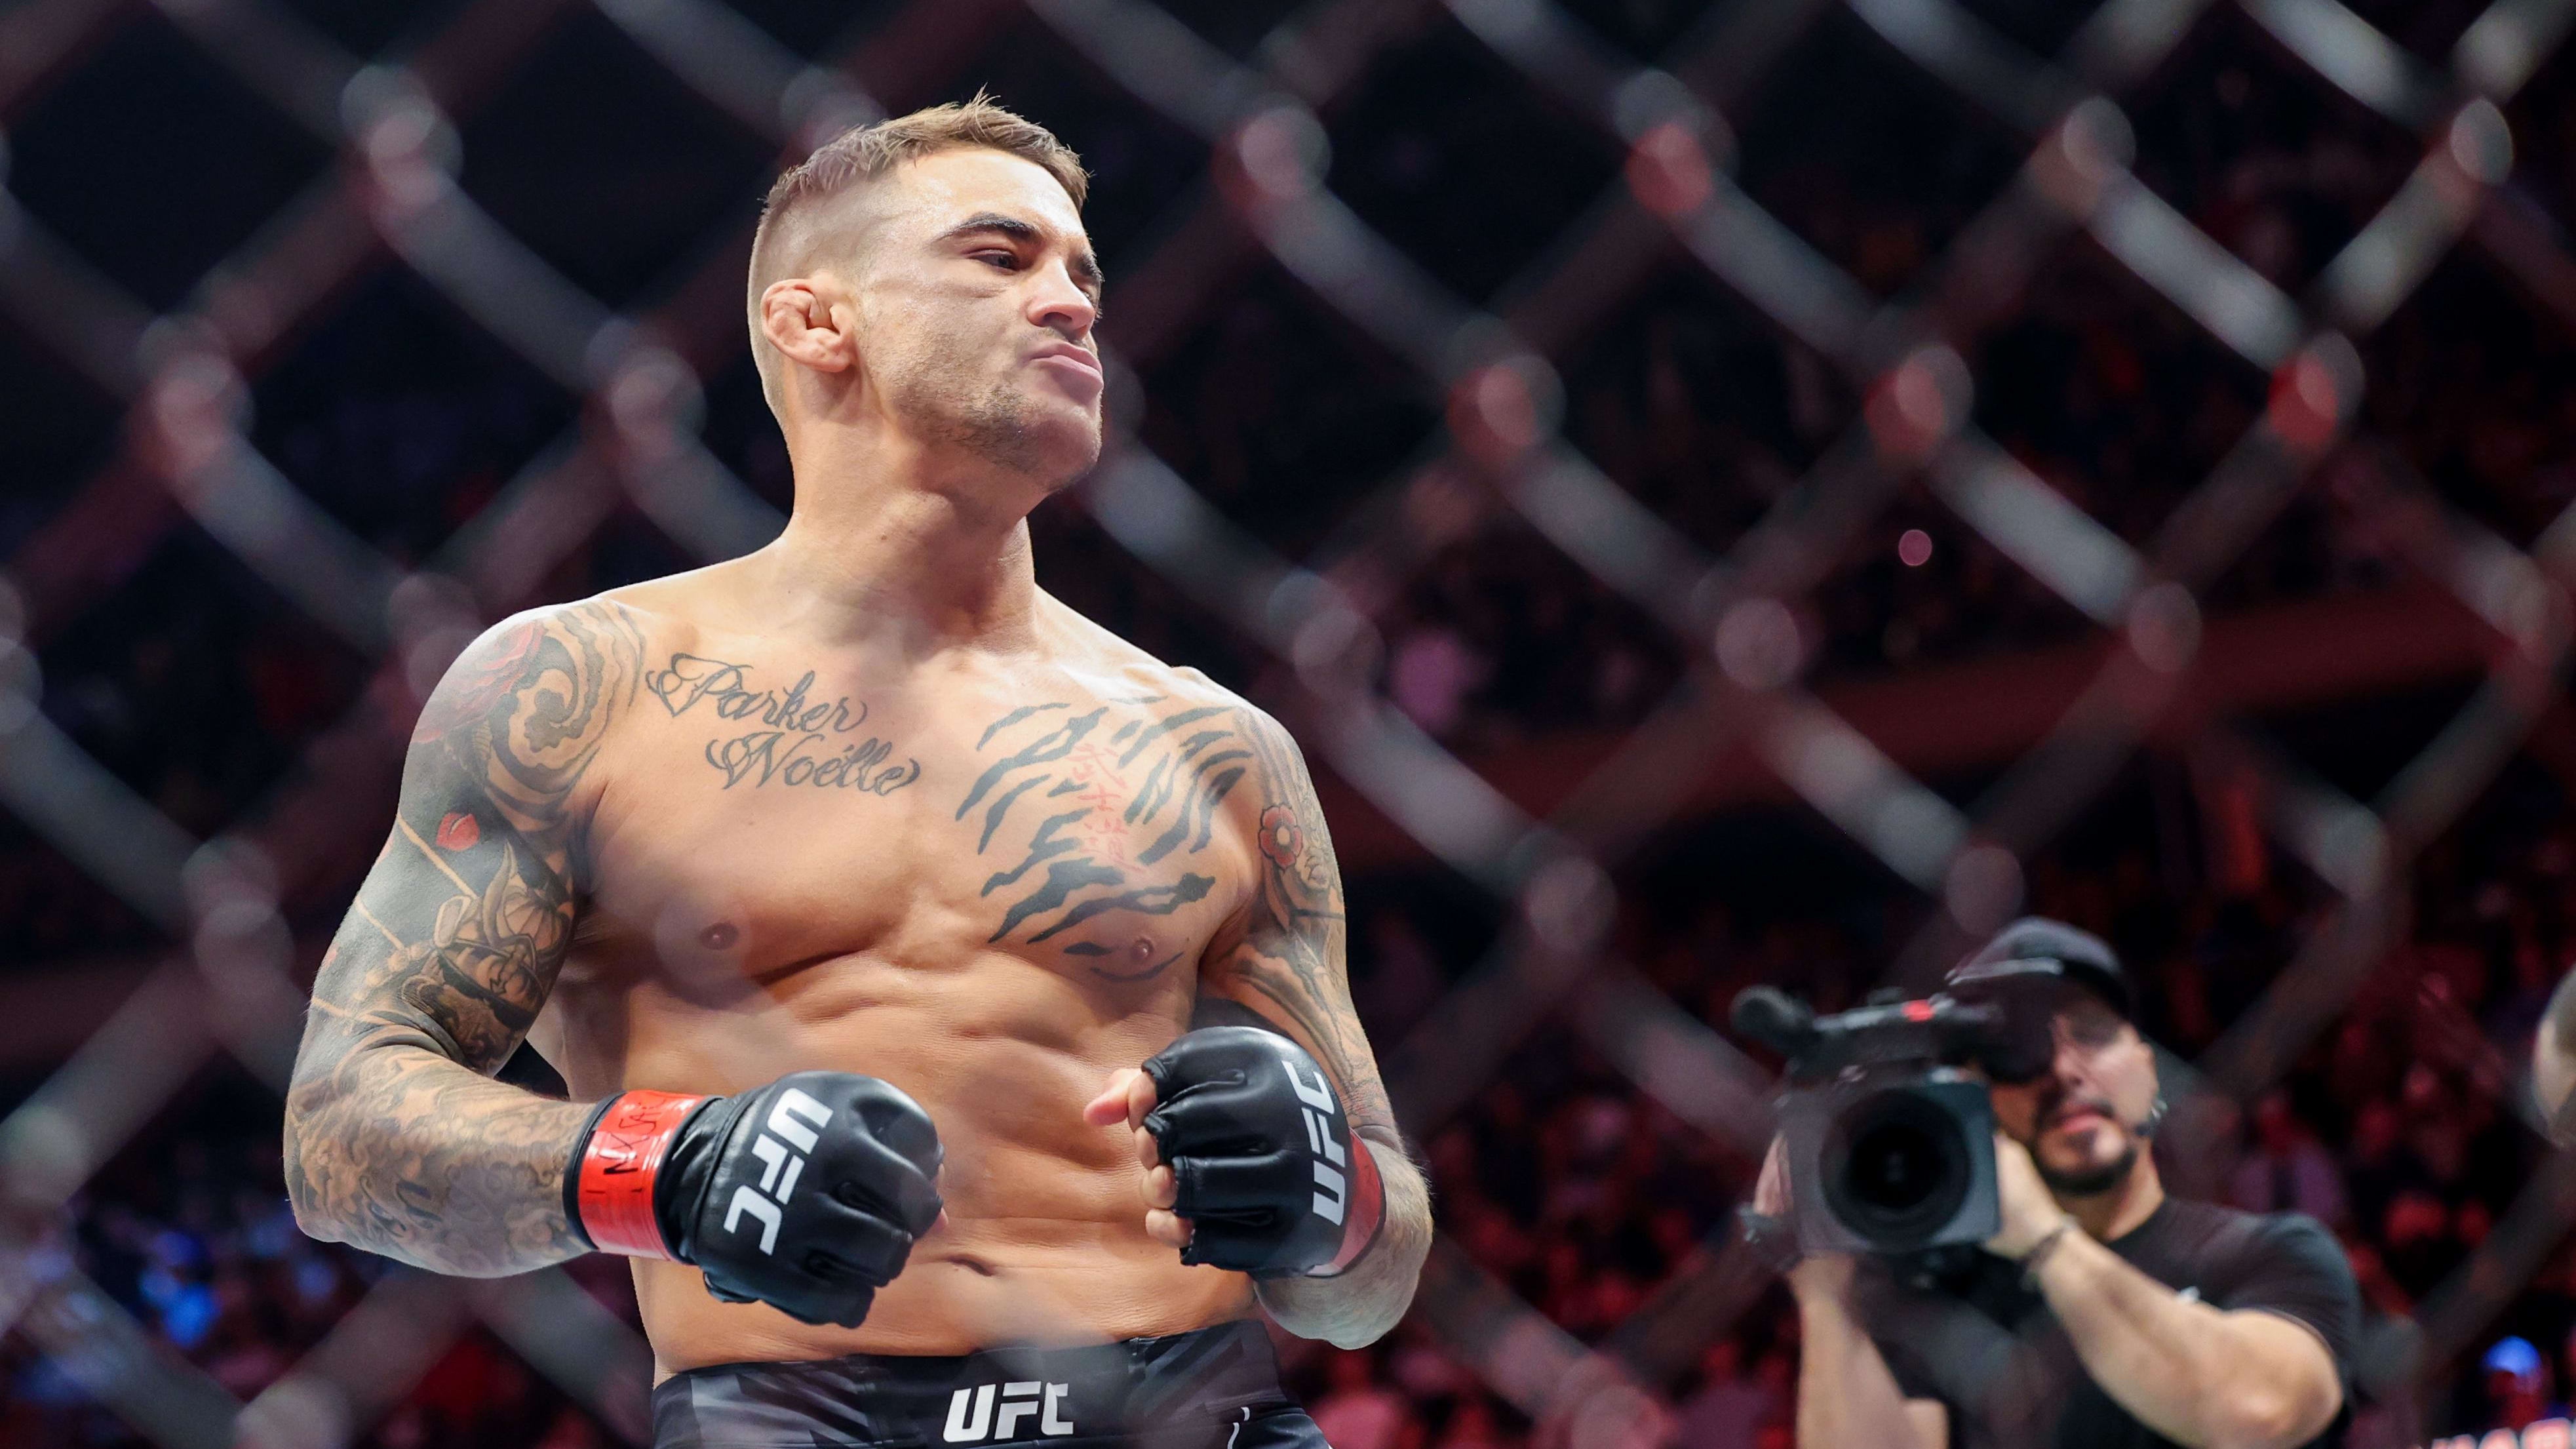 UFC Star Dustin Poirier Down to Follow Conor McGregor to Hollywood, Pursue Acting Career